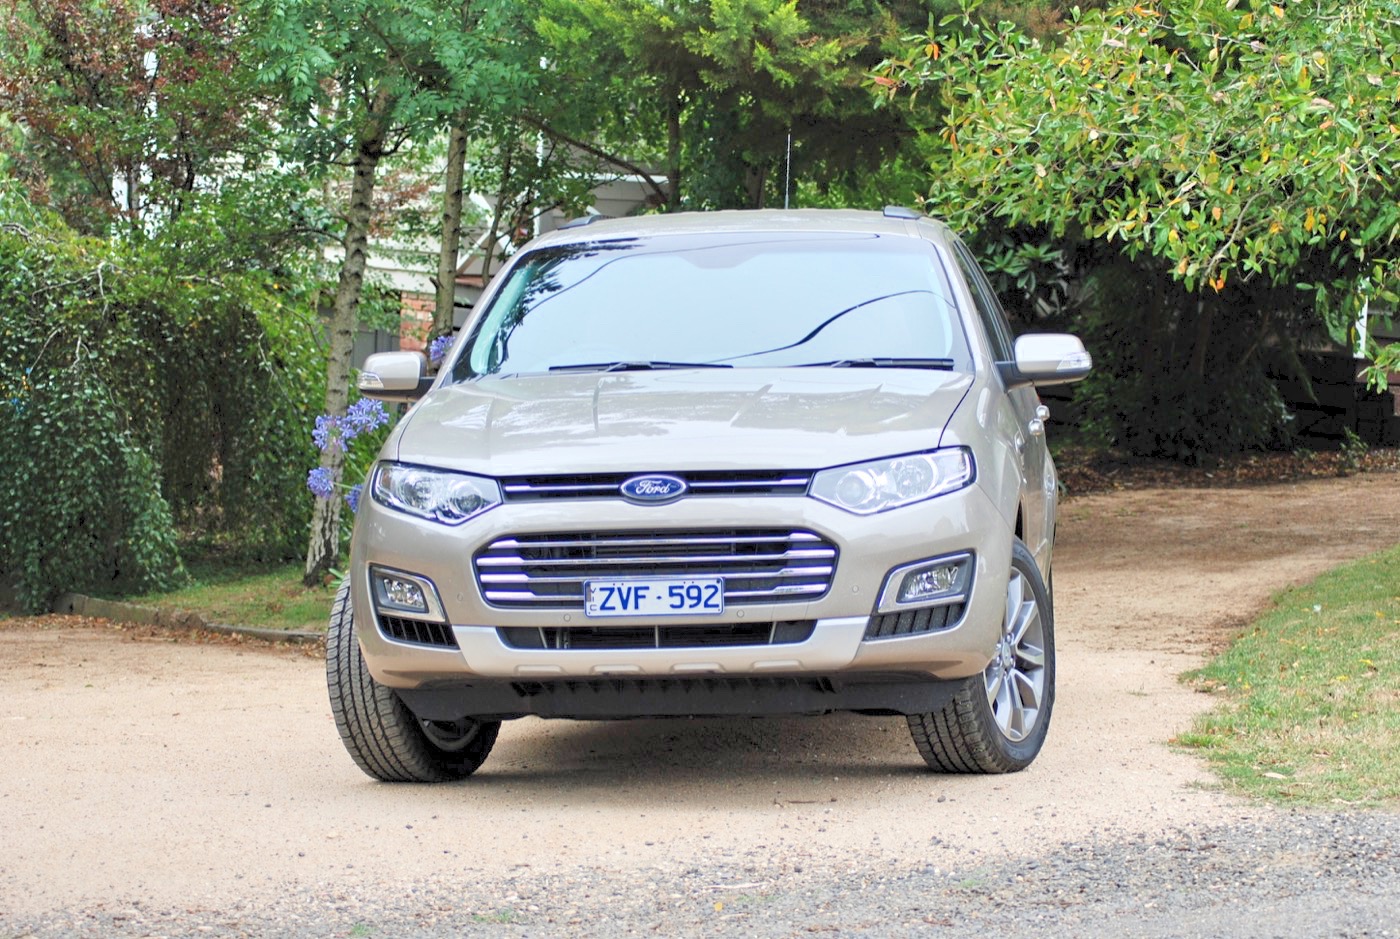 Ford territory road test review